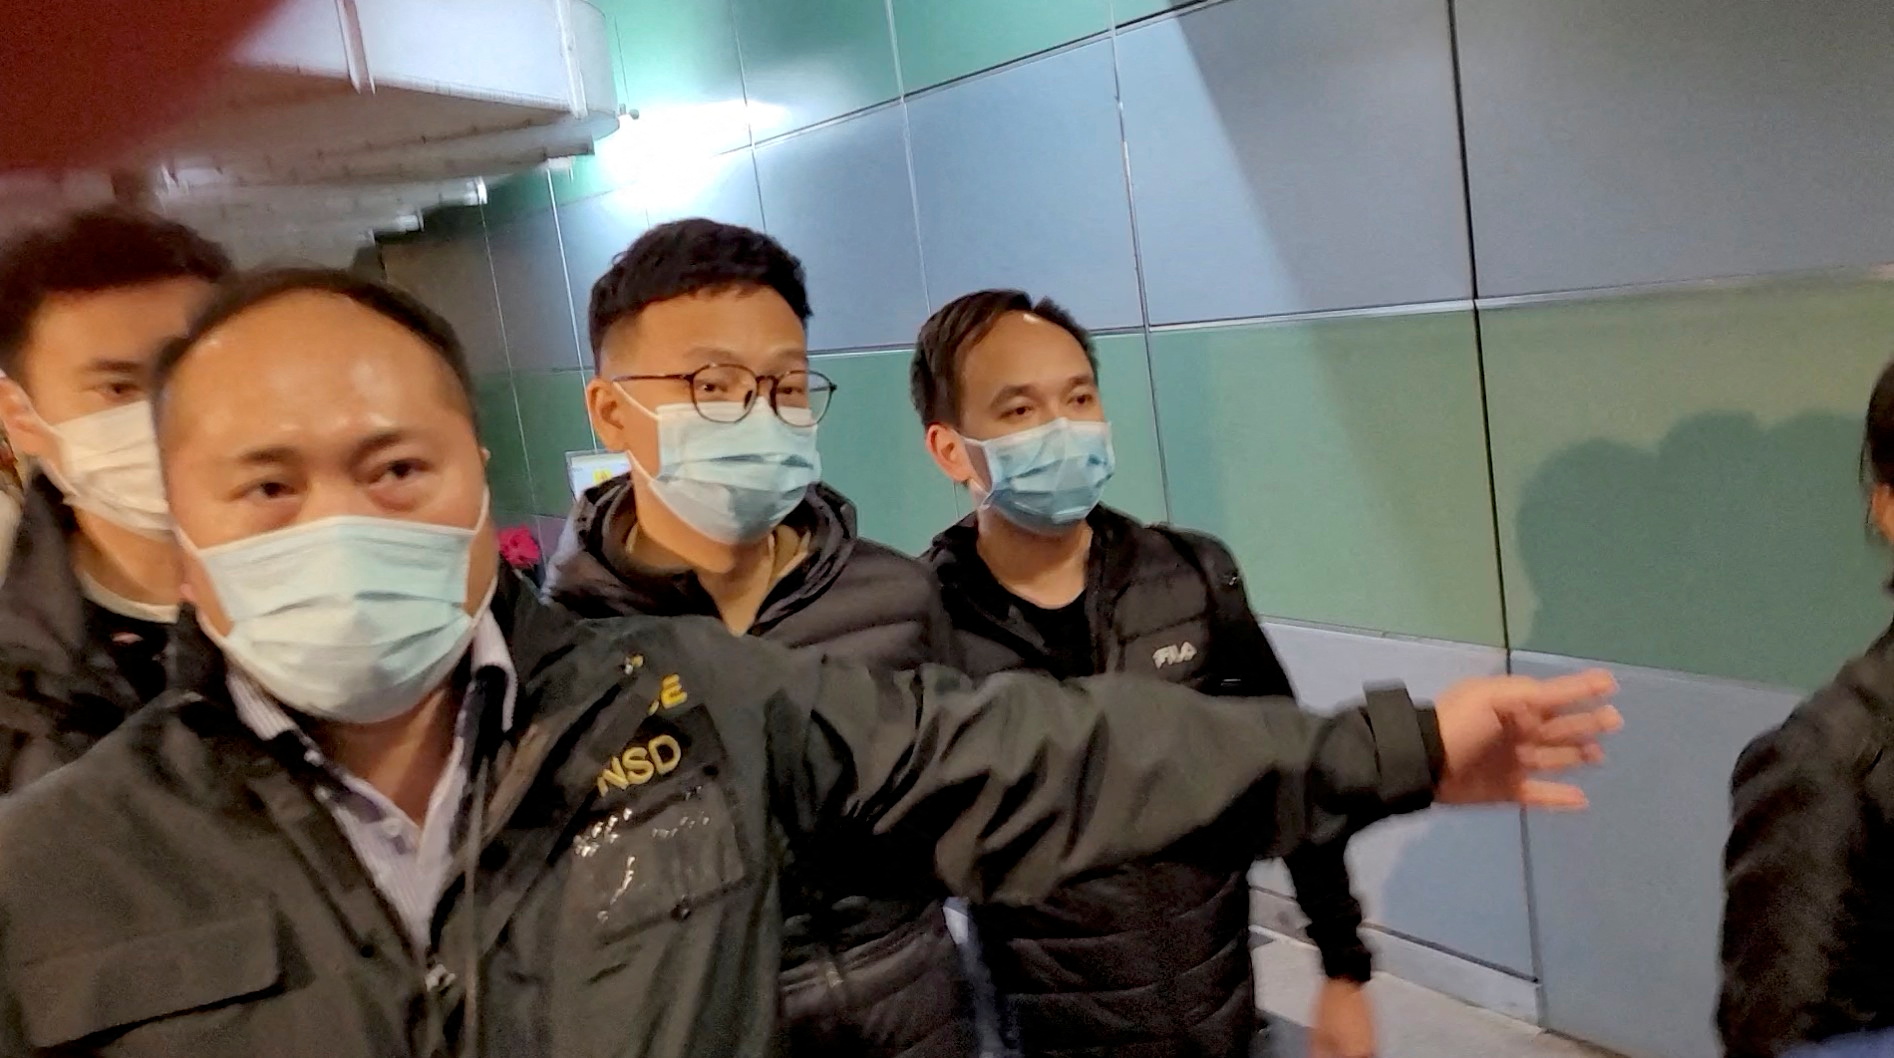 Police officers escort Stand News editor Patrick Lam through a building hallway in Hongkong